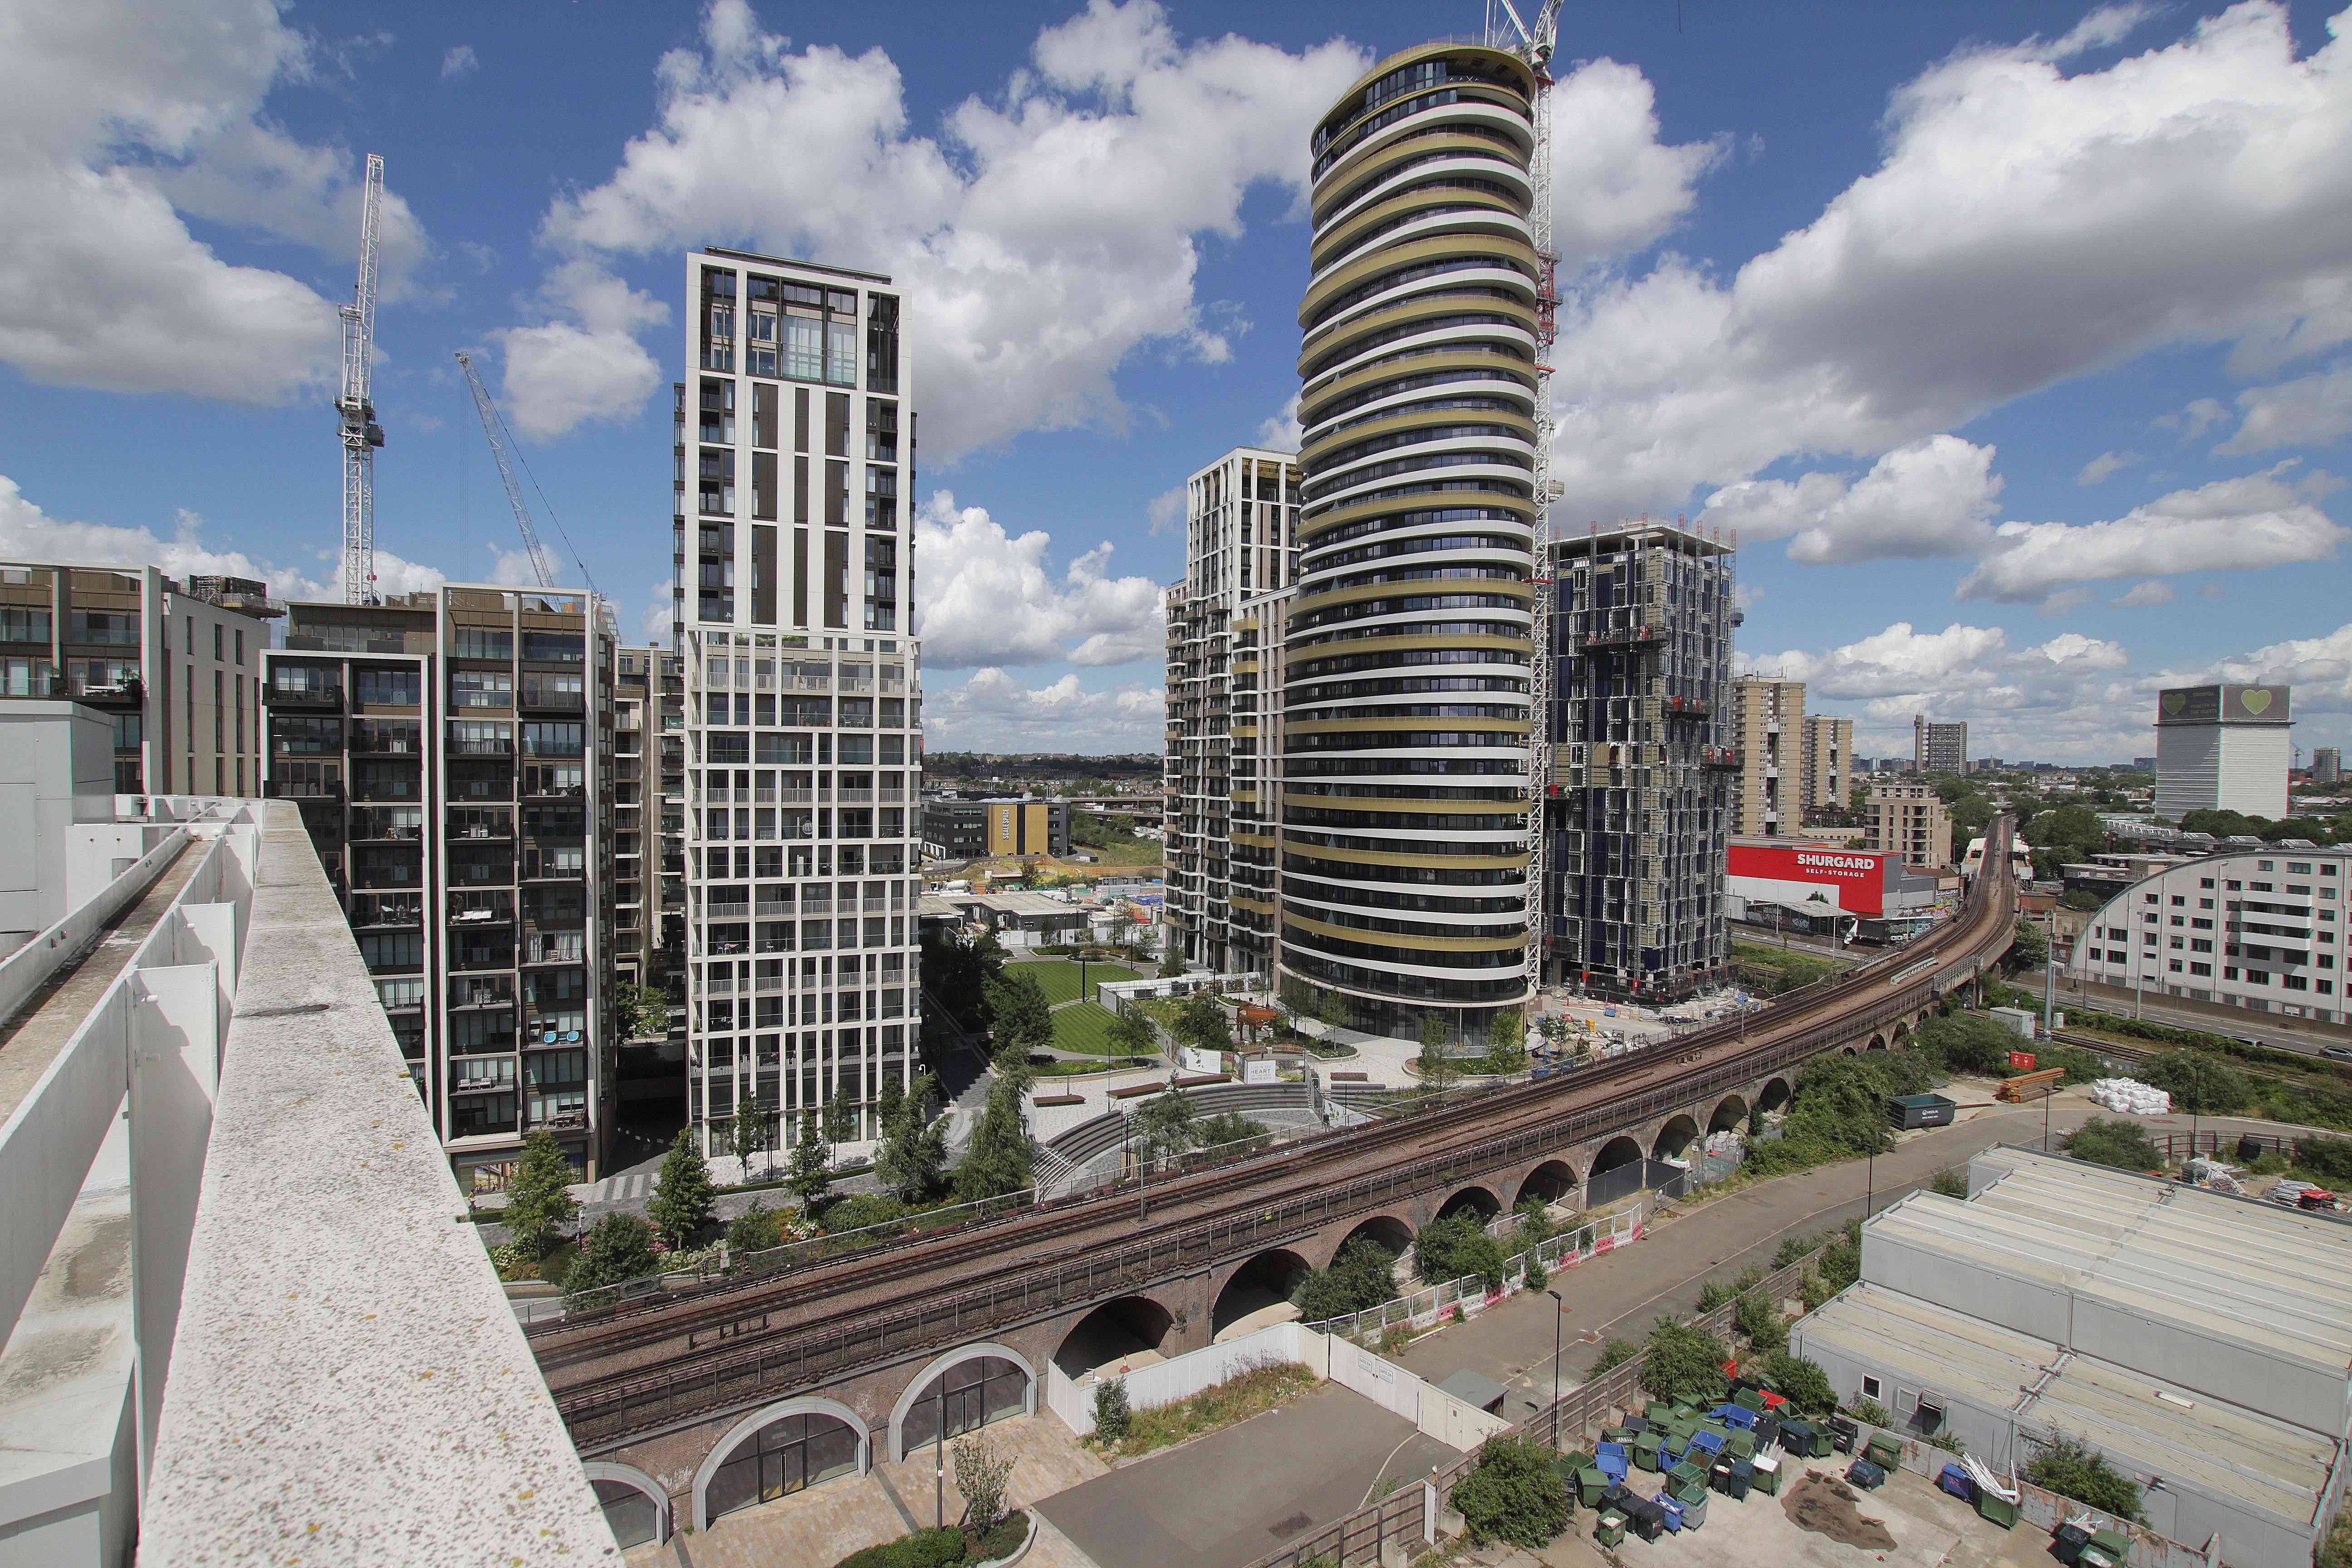 An image of White City Living captured by Time-Lapse Systems.